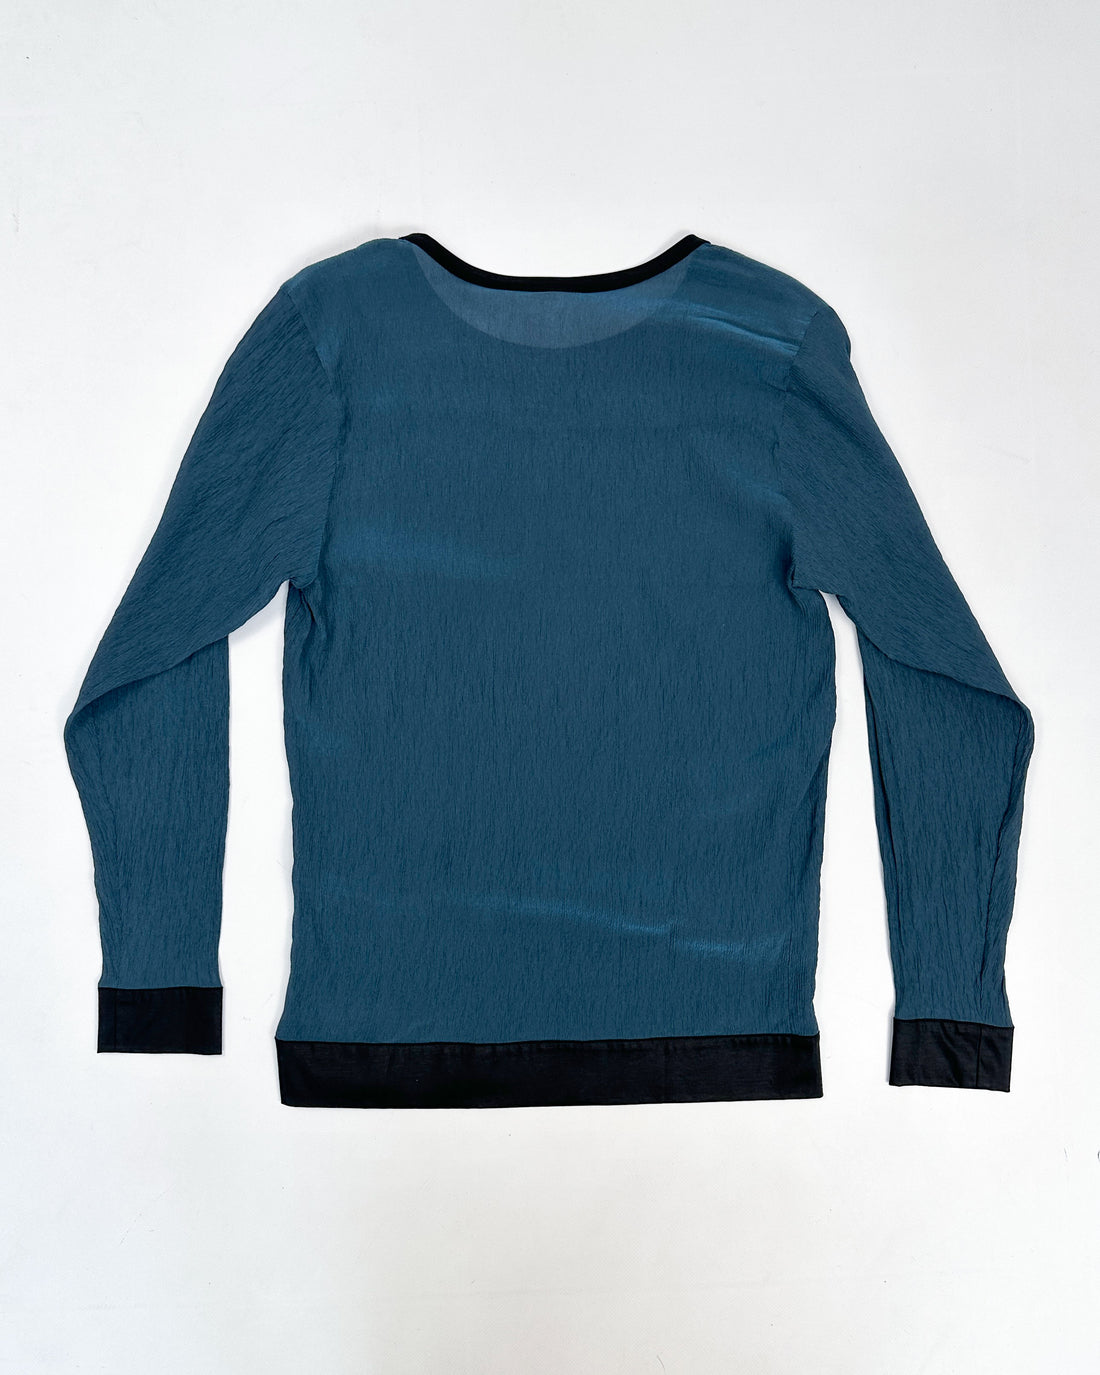 Helmut Lang Pleated Blue Long Sleeve Top 2000's